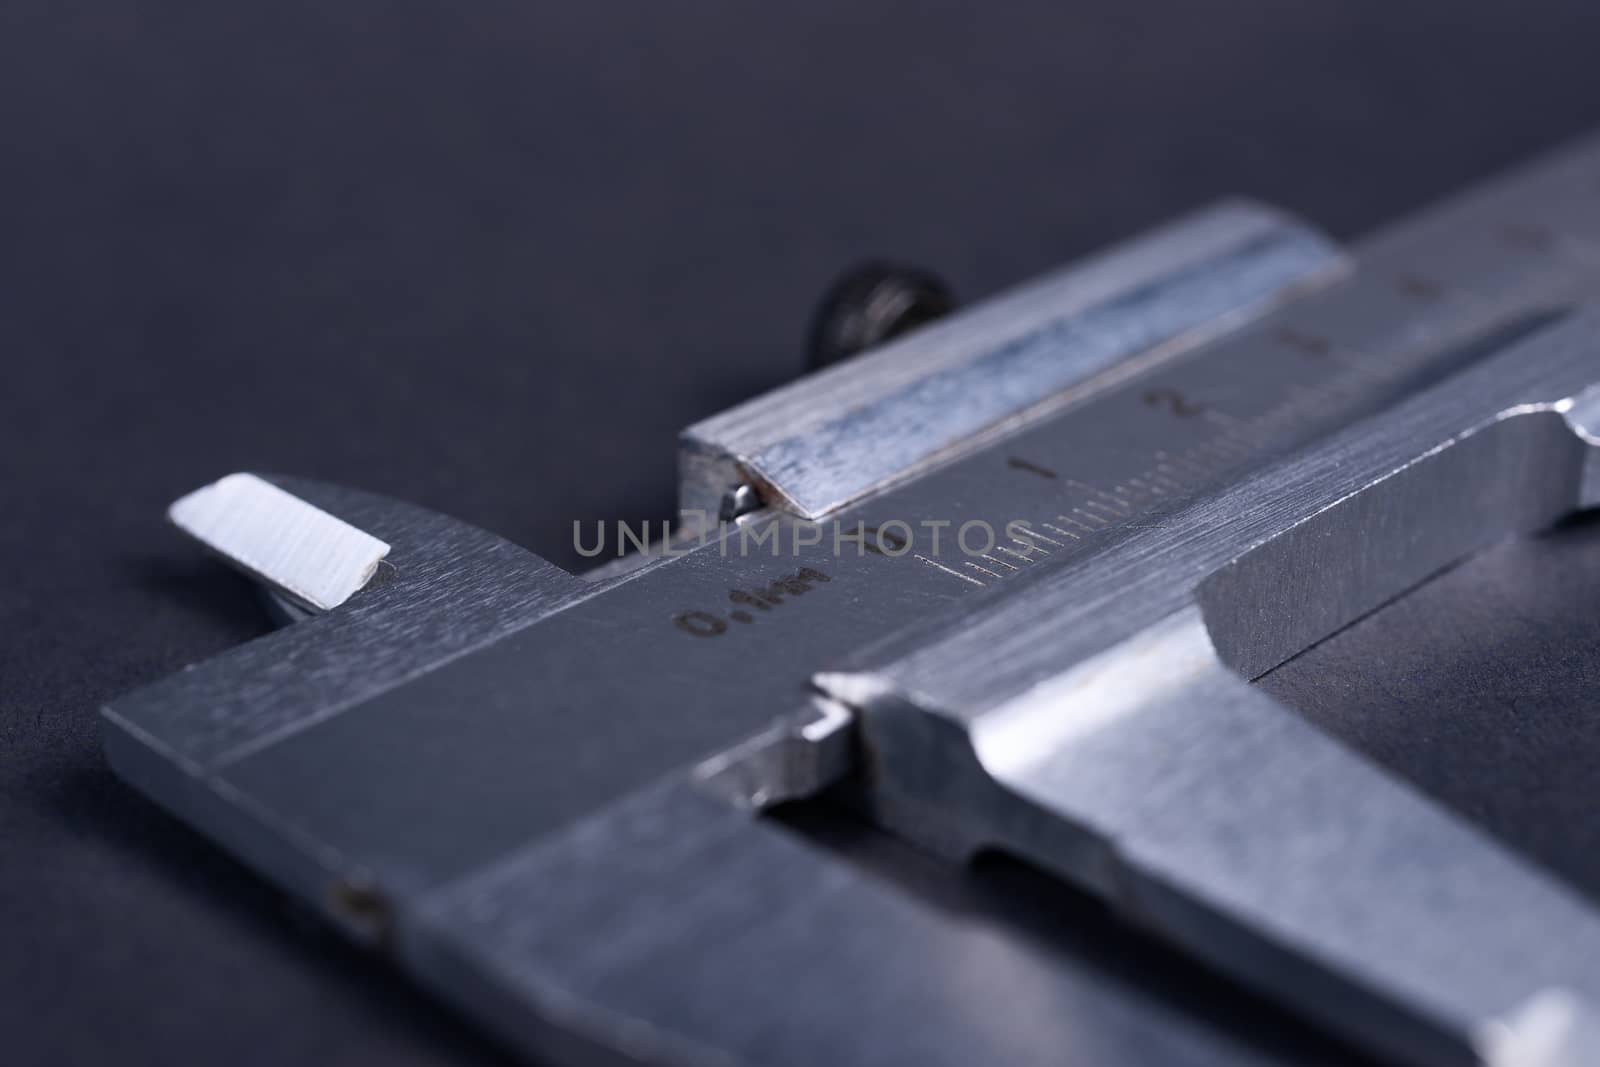 Vintage steel caliper tool closeup. Scale in focus. Tool in very good condition. Scale in metric units, milimeter step. Stock photo on blurred gray background. by alexsdriver